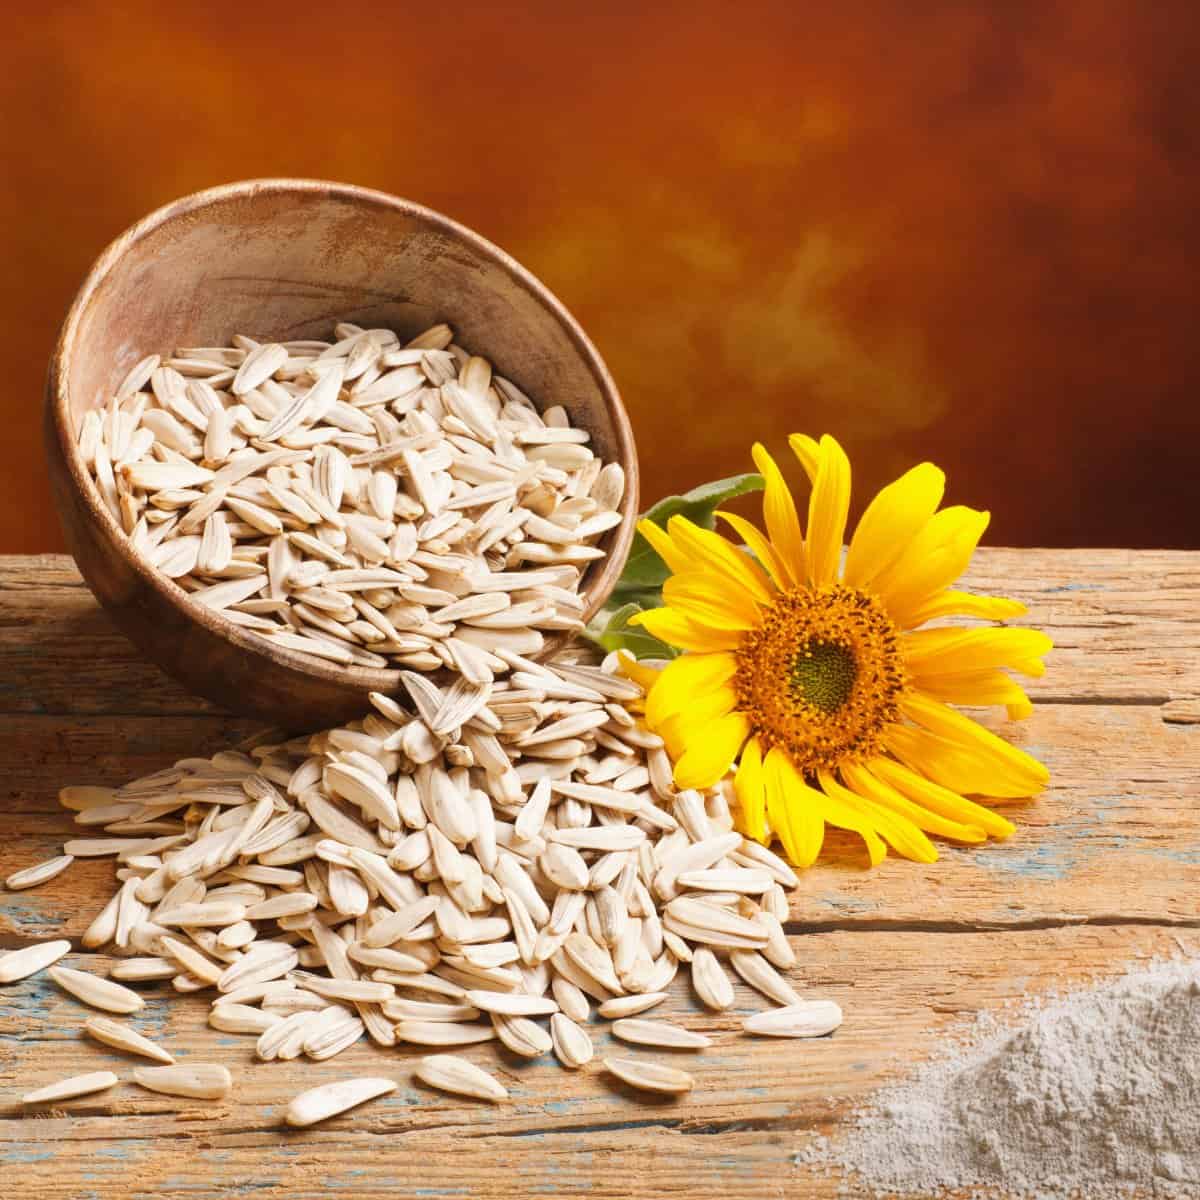 What is sunflower seed flour